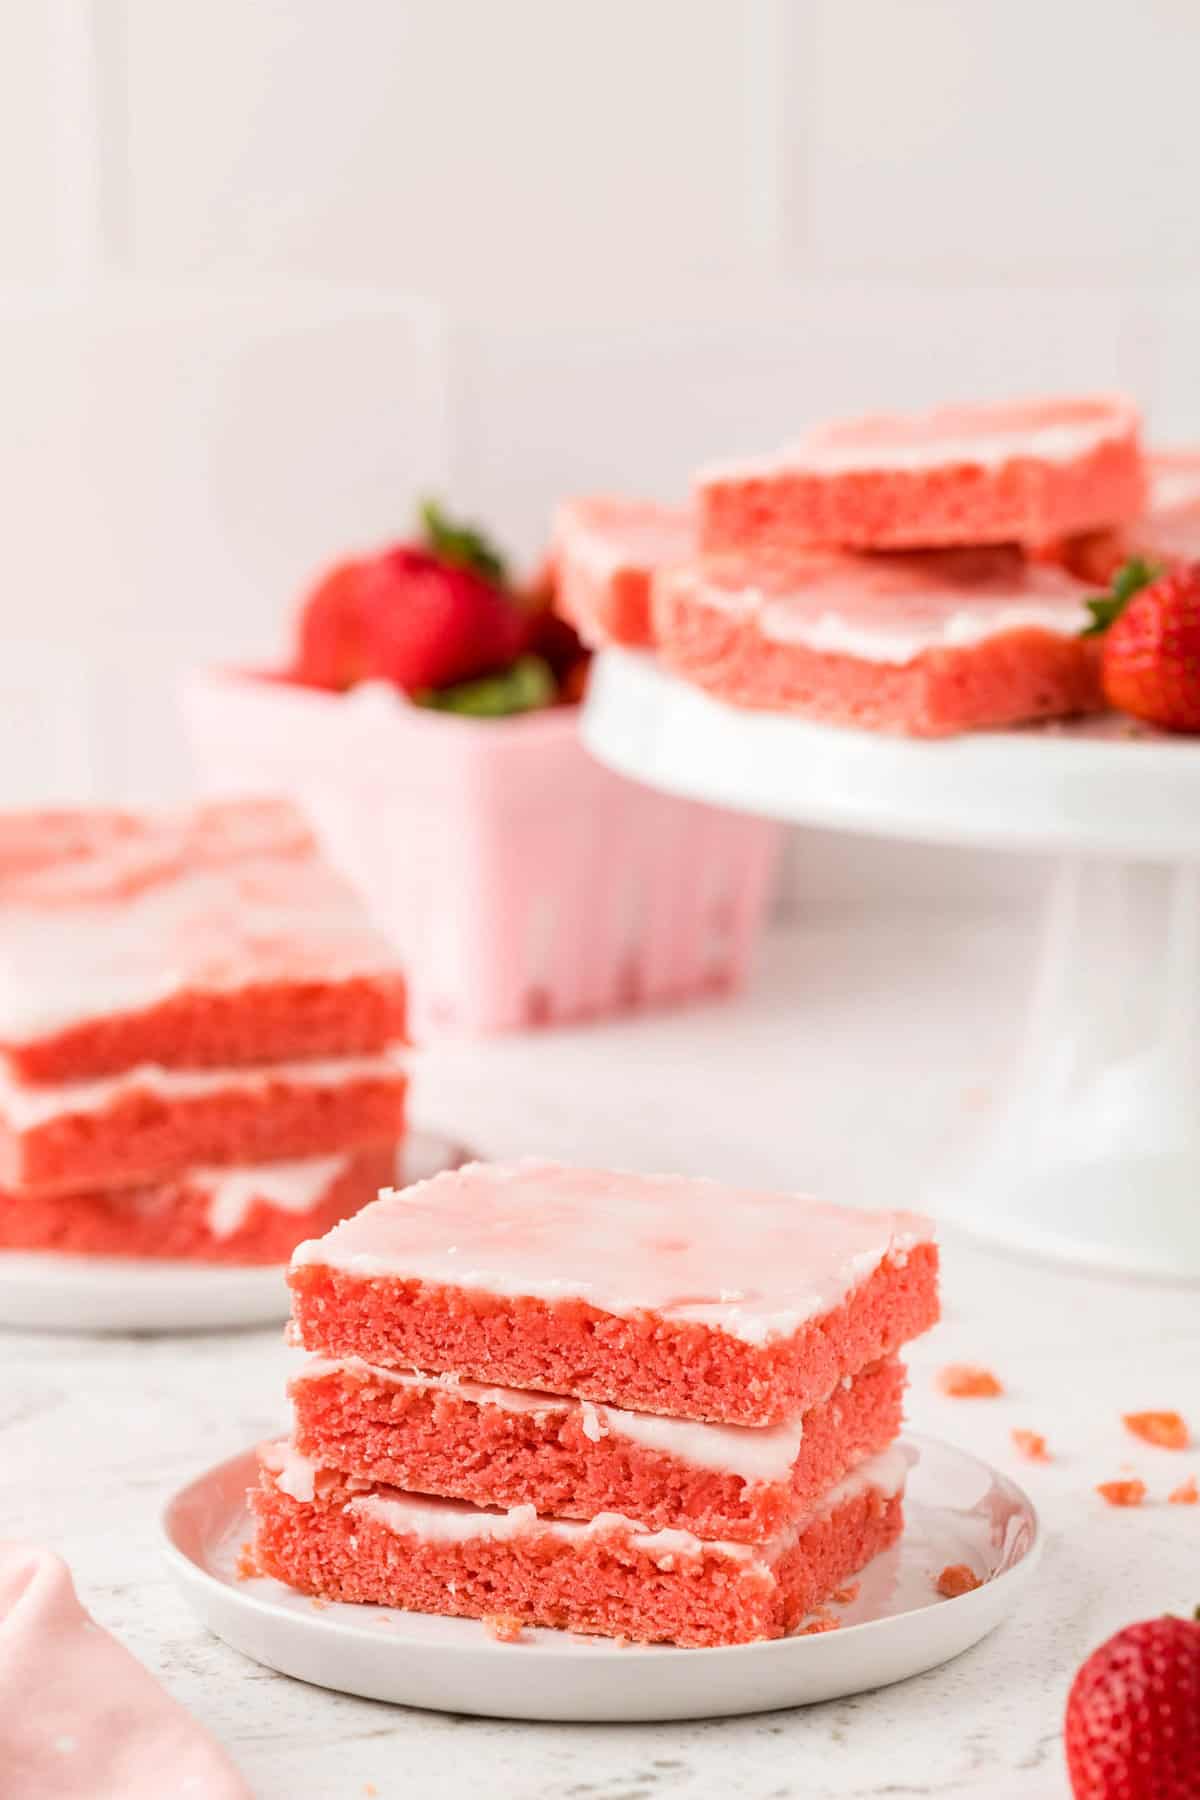 Strawberry Brownies Recipe on Pedestal and Plated Ready to Enjoy